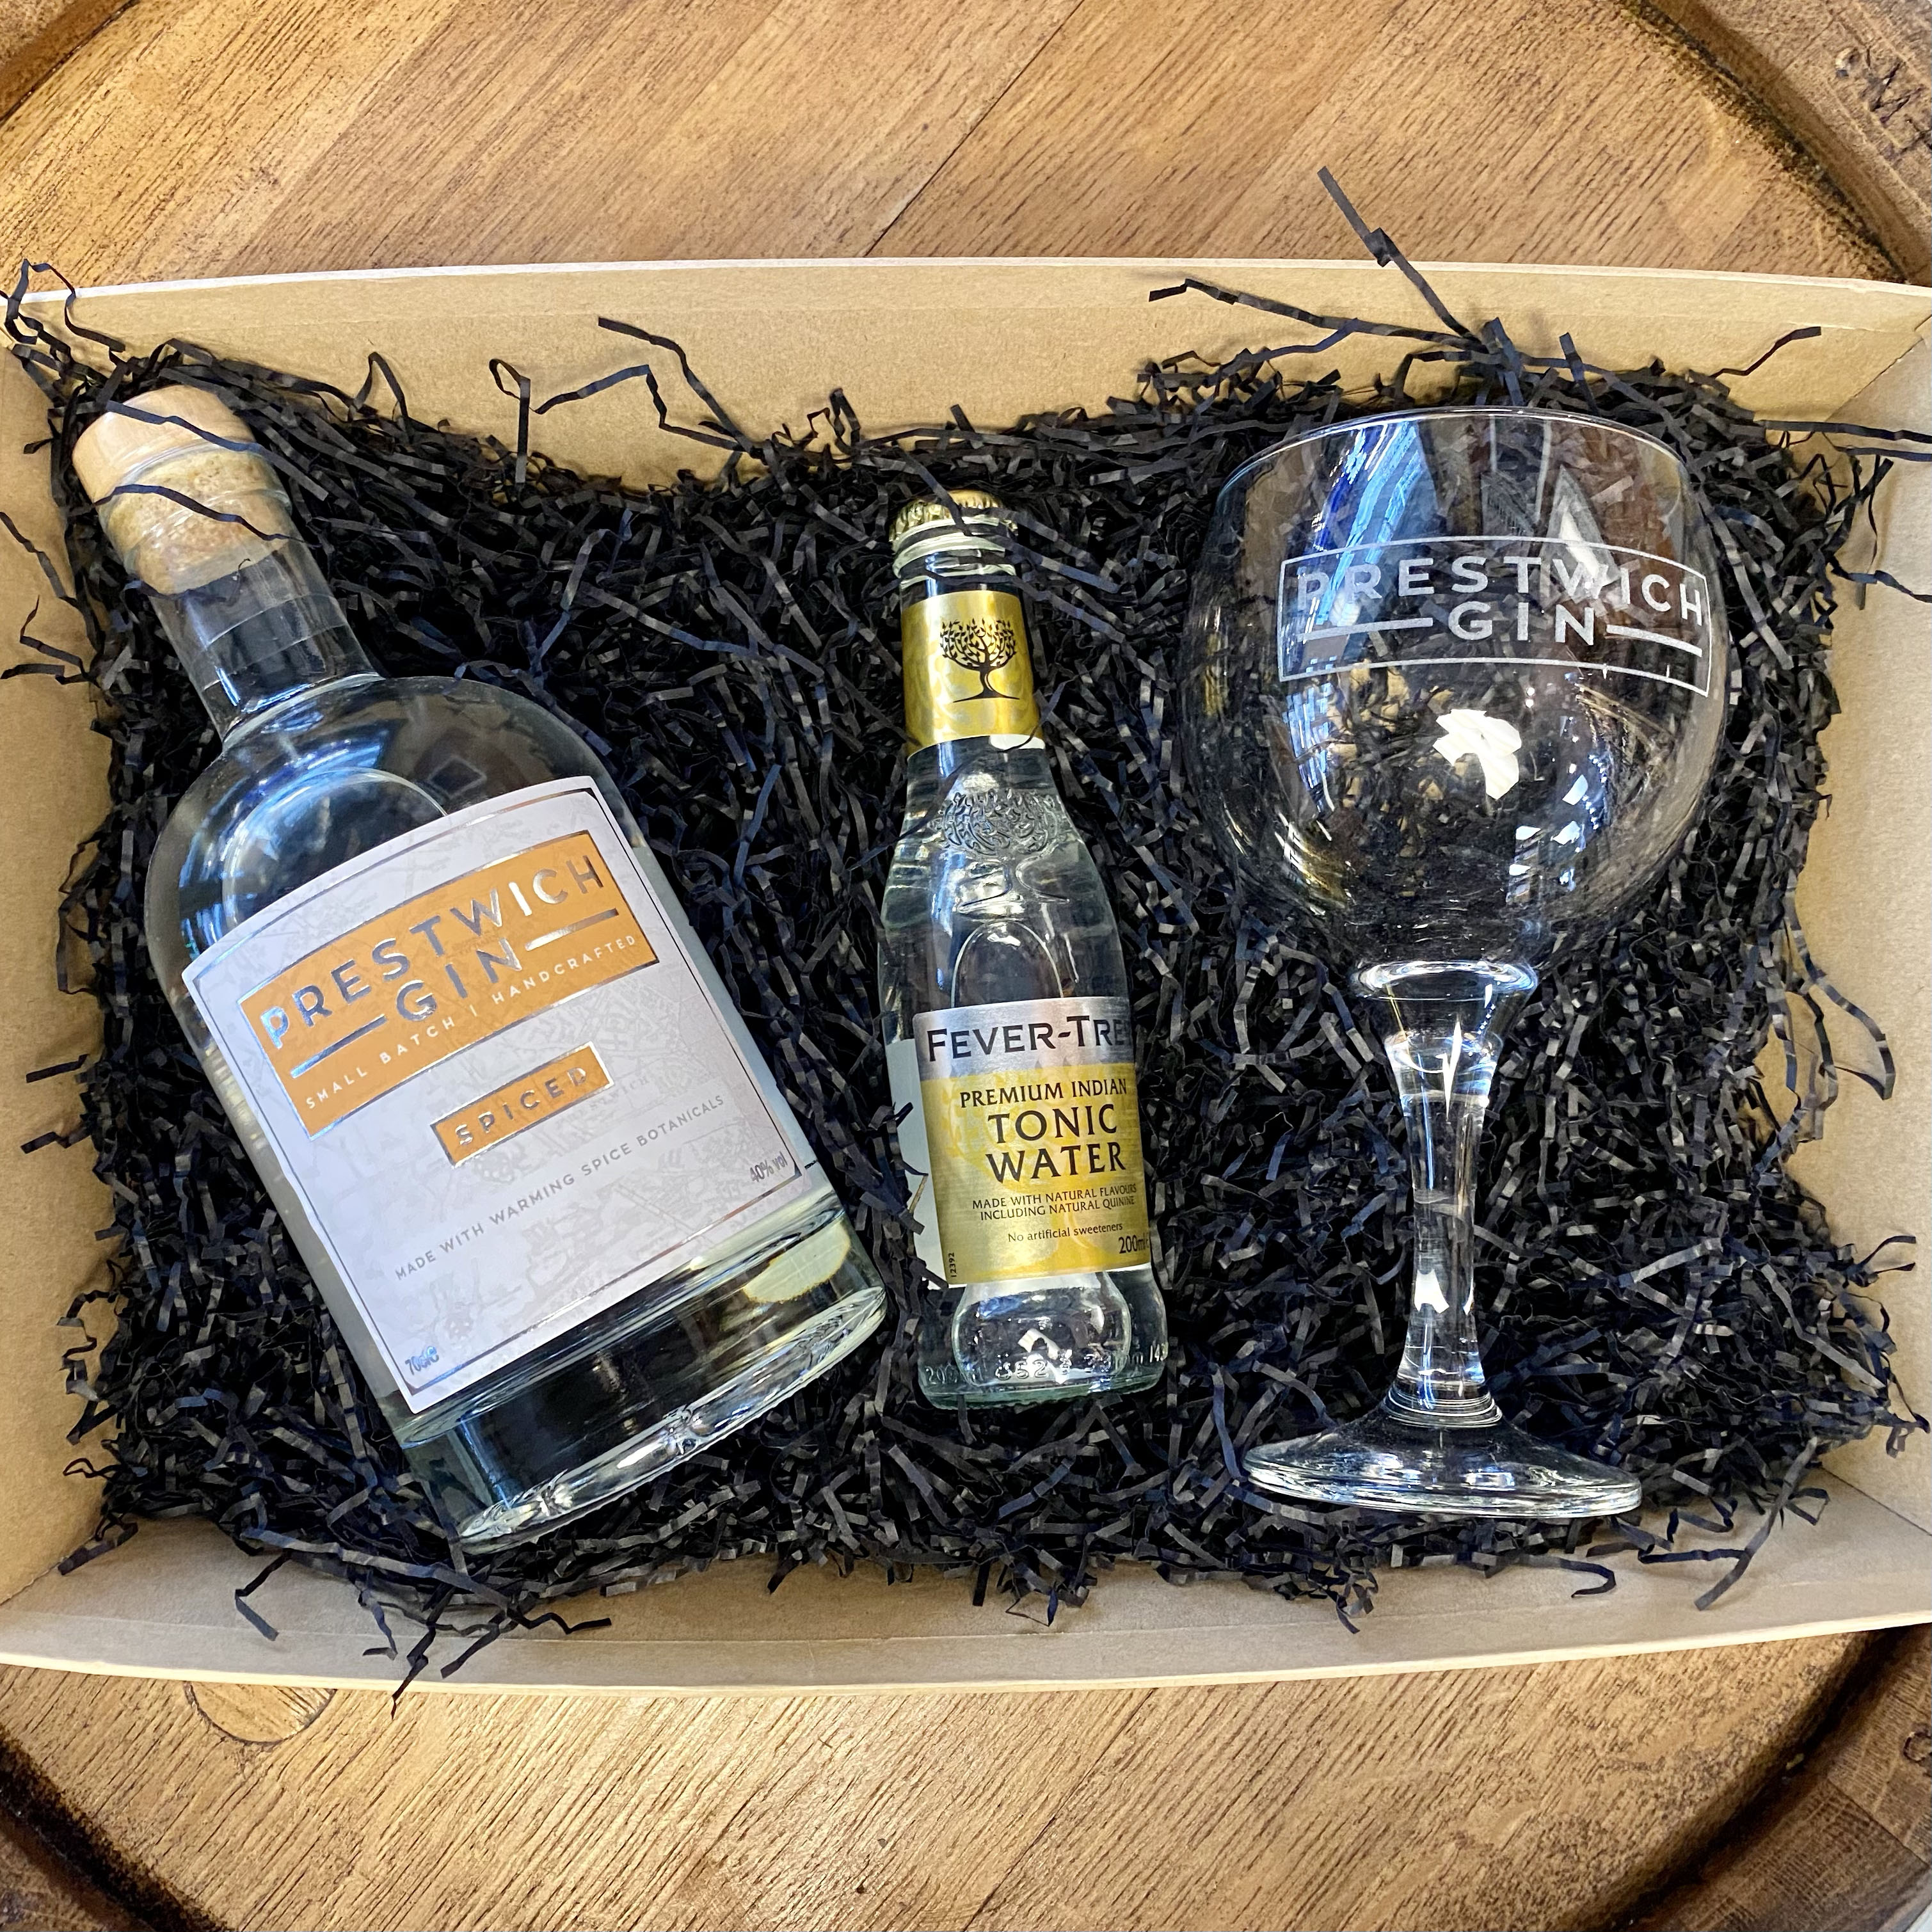 Prestwich Spiced Gin & Tonic Hamper with Glass